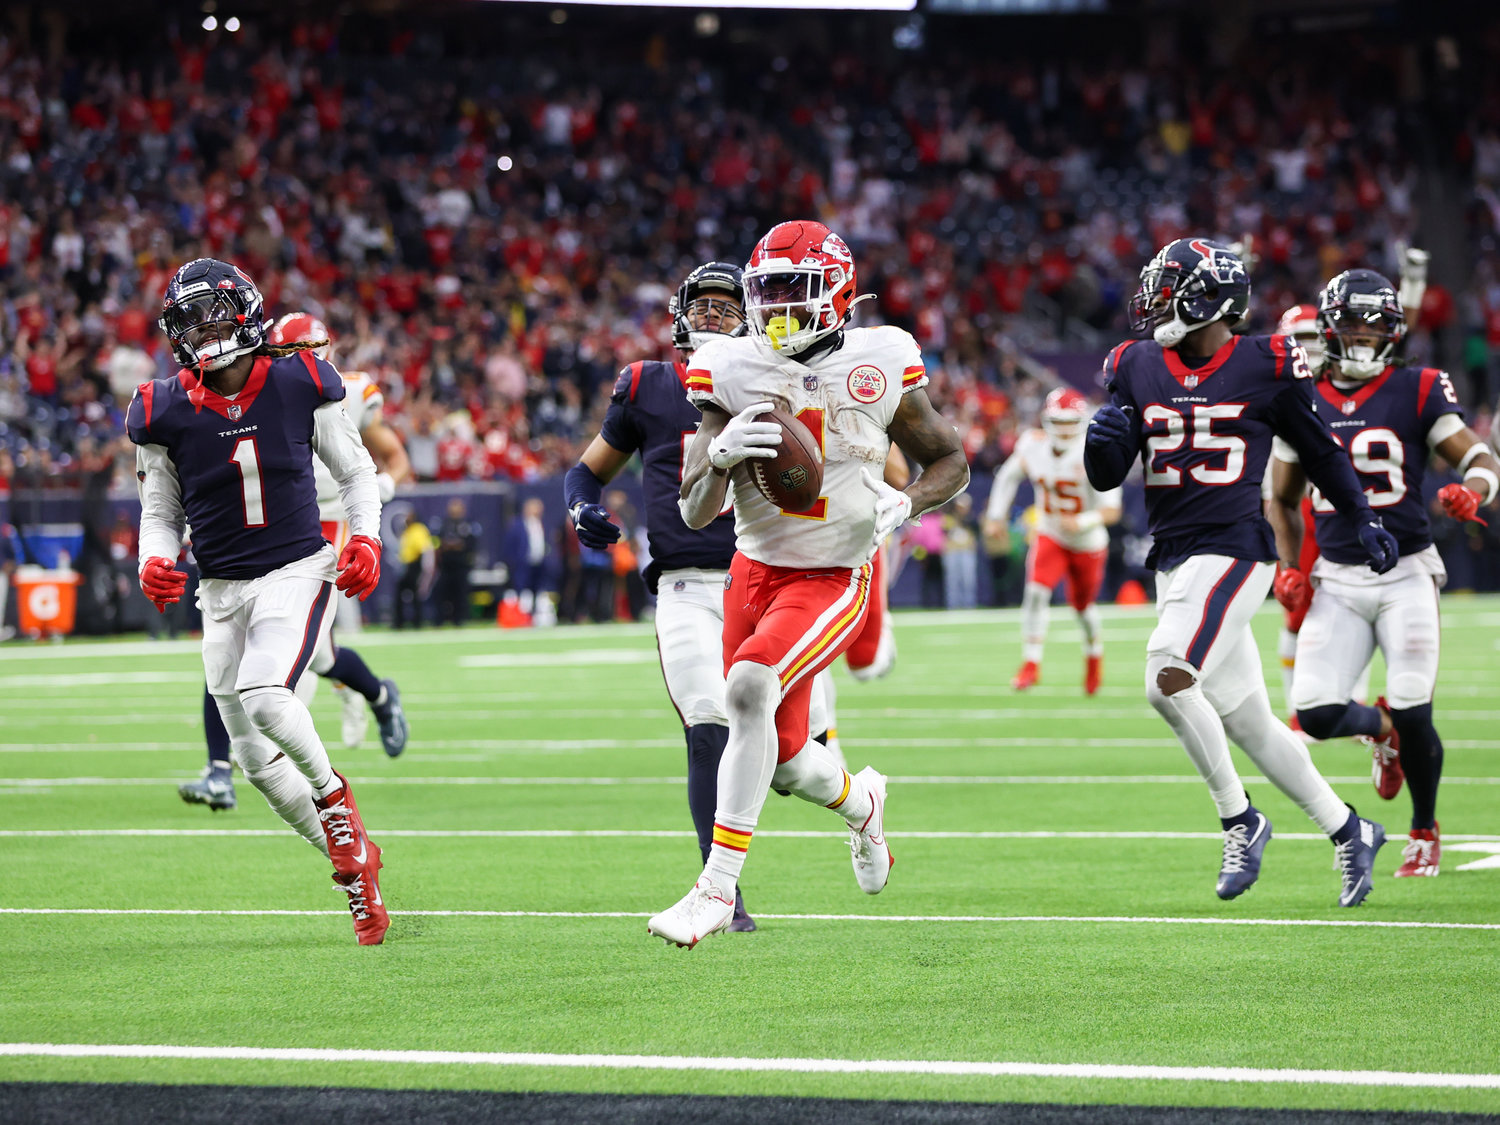 Kansas City Chiefs running back Jerick McKinnon (1) scores the game-winning touchdown in overtime on a 26-yard carry during an NFL game between the Texans and the Chiefs on Dec. 18, 2022, in Houston.